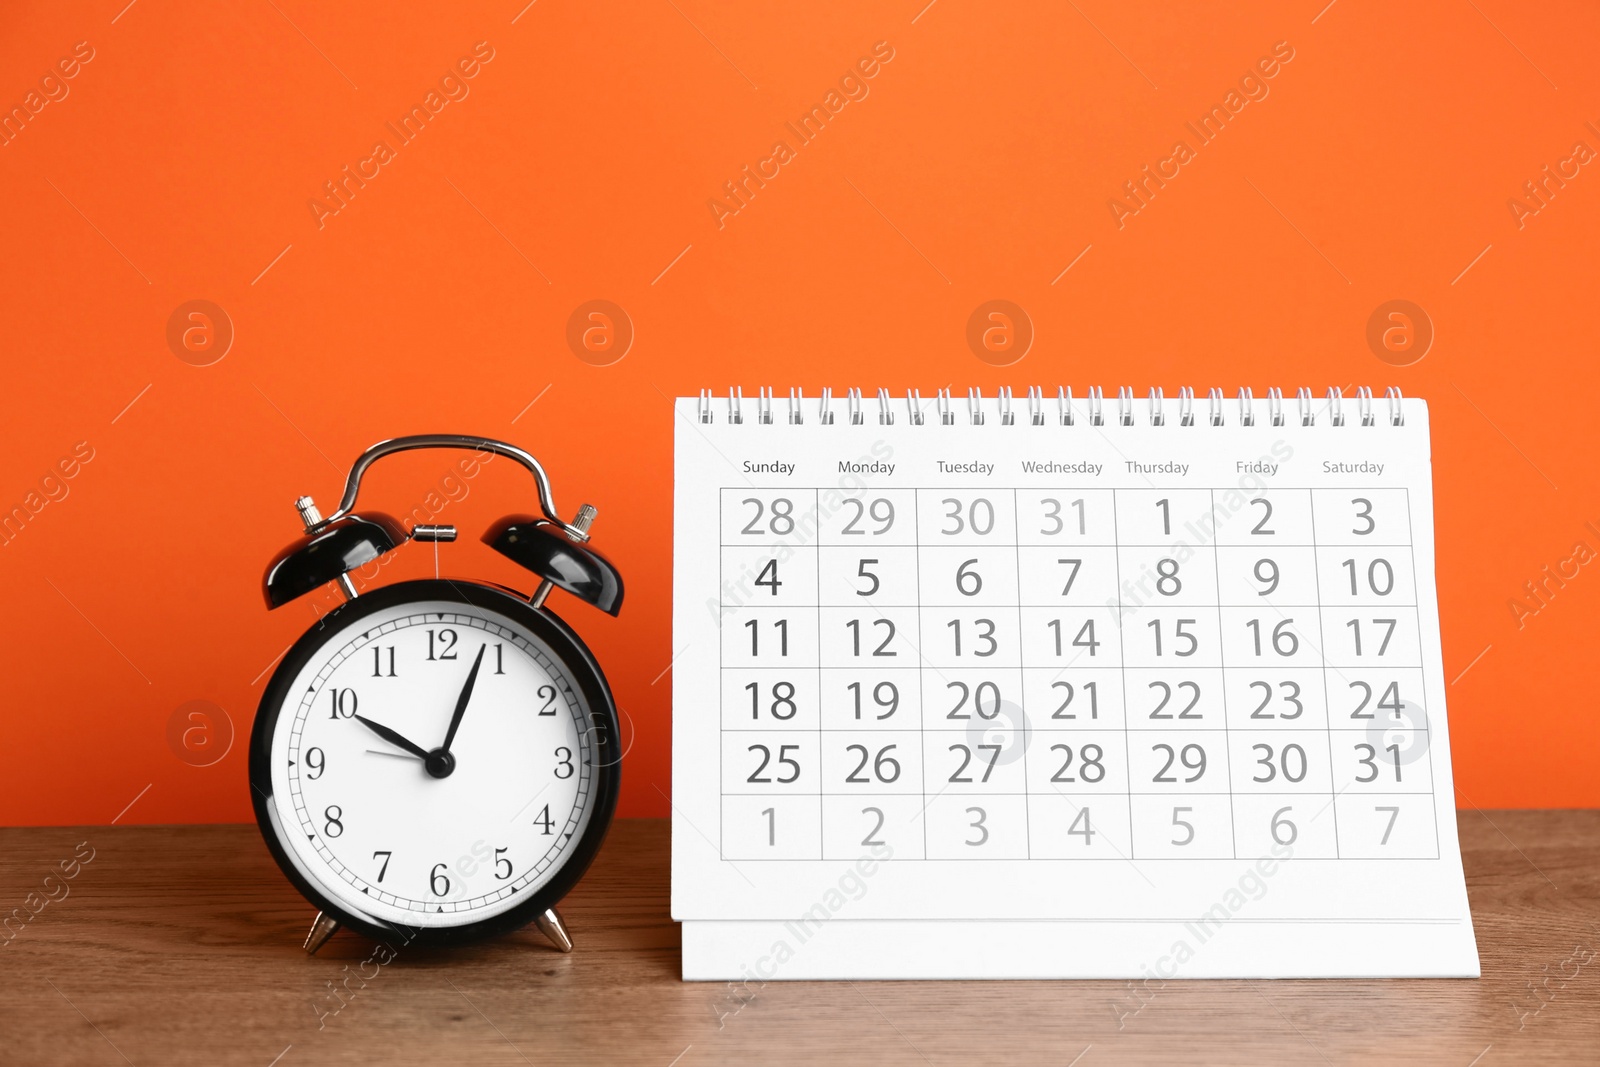 Photo of Calendar and alarm clock on wooden table against orange background